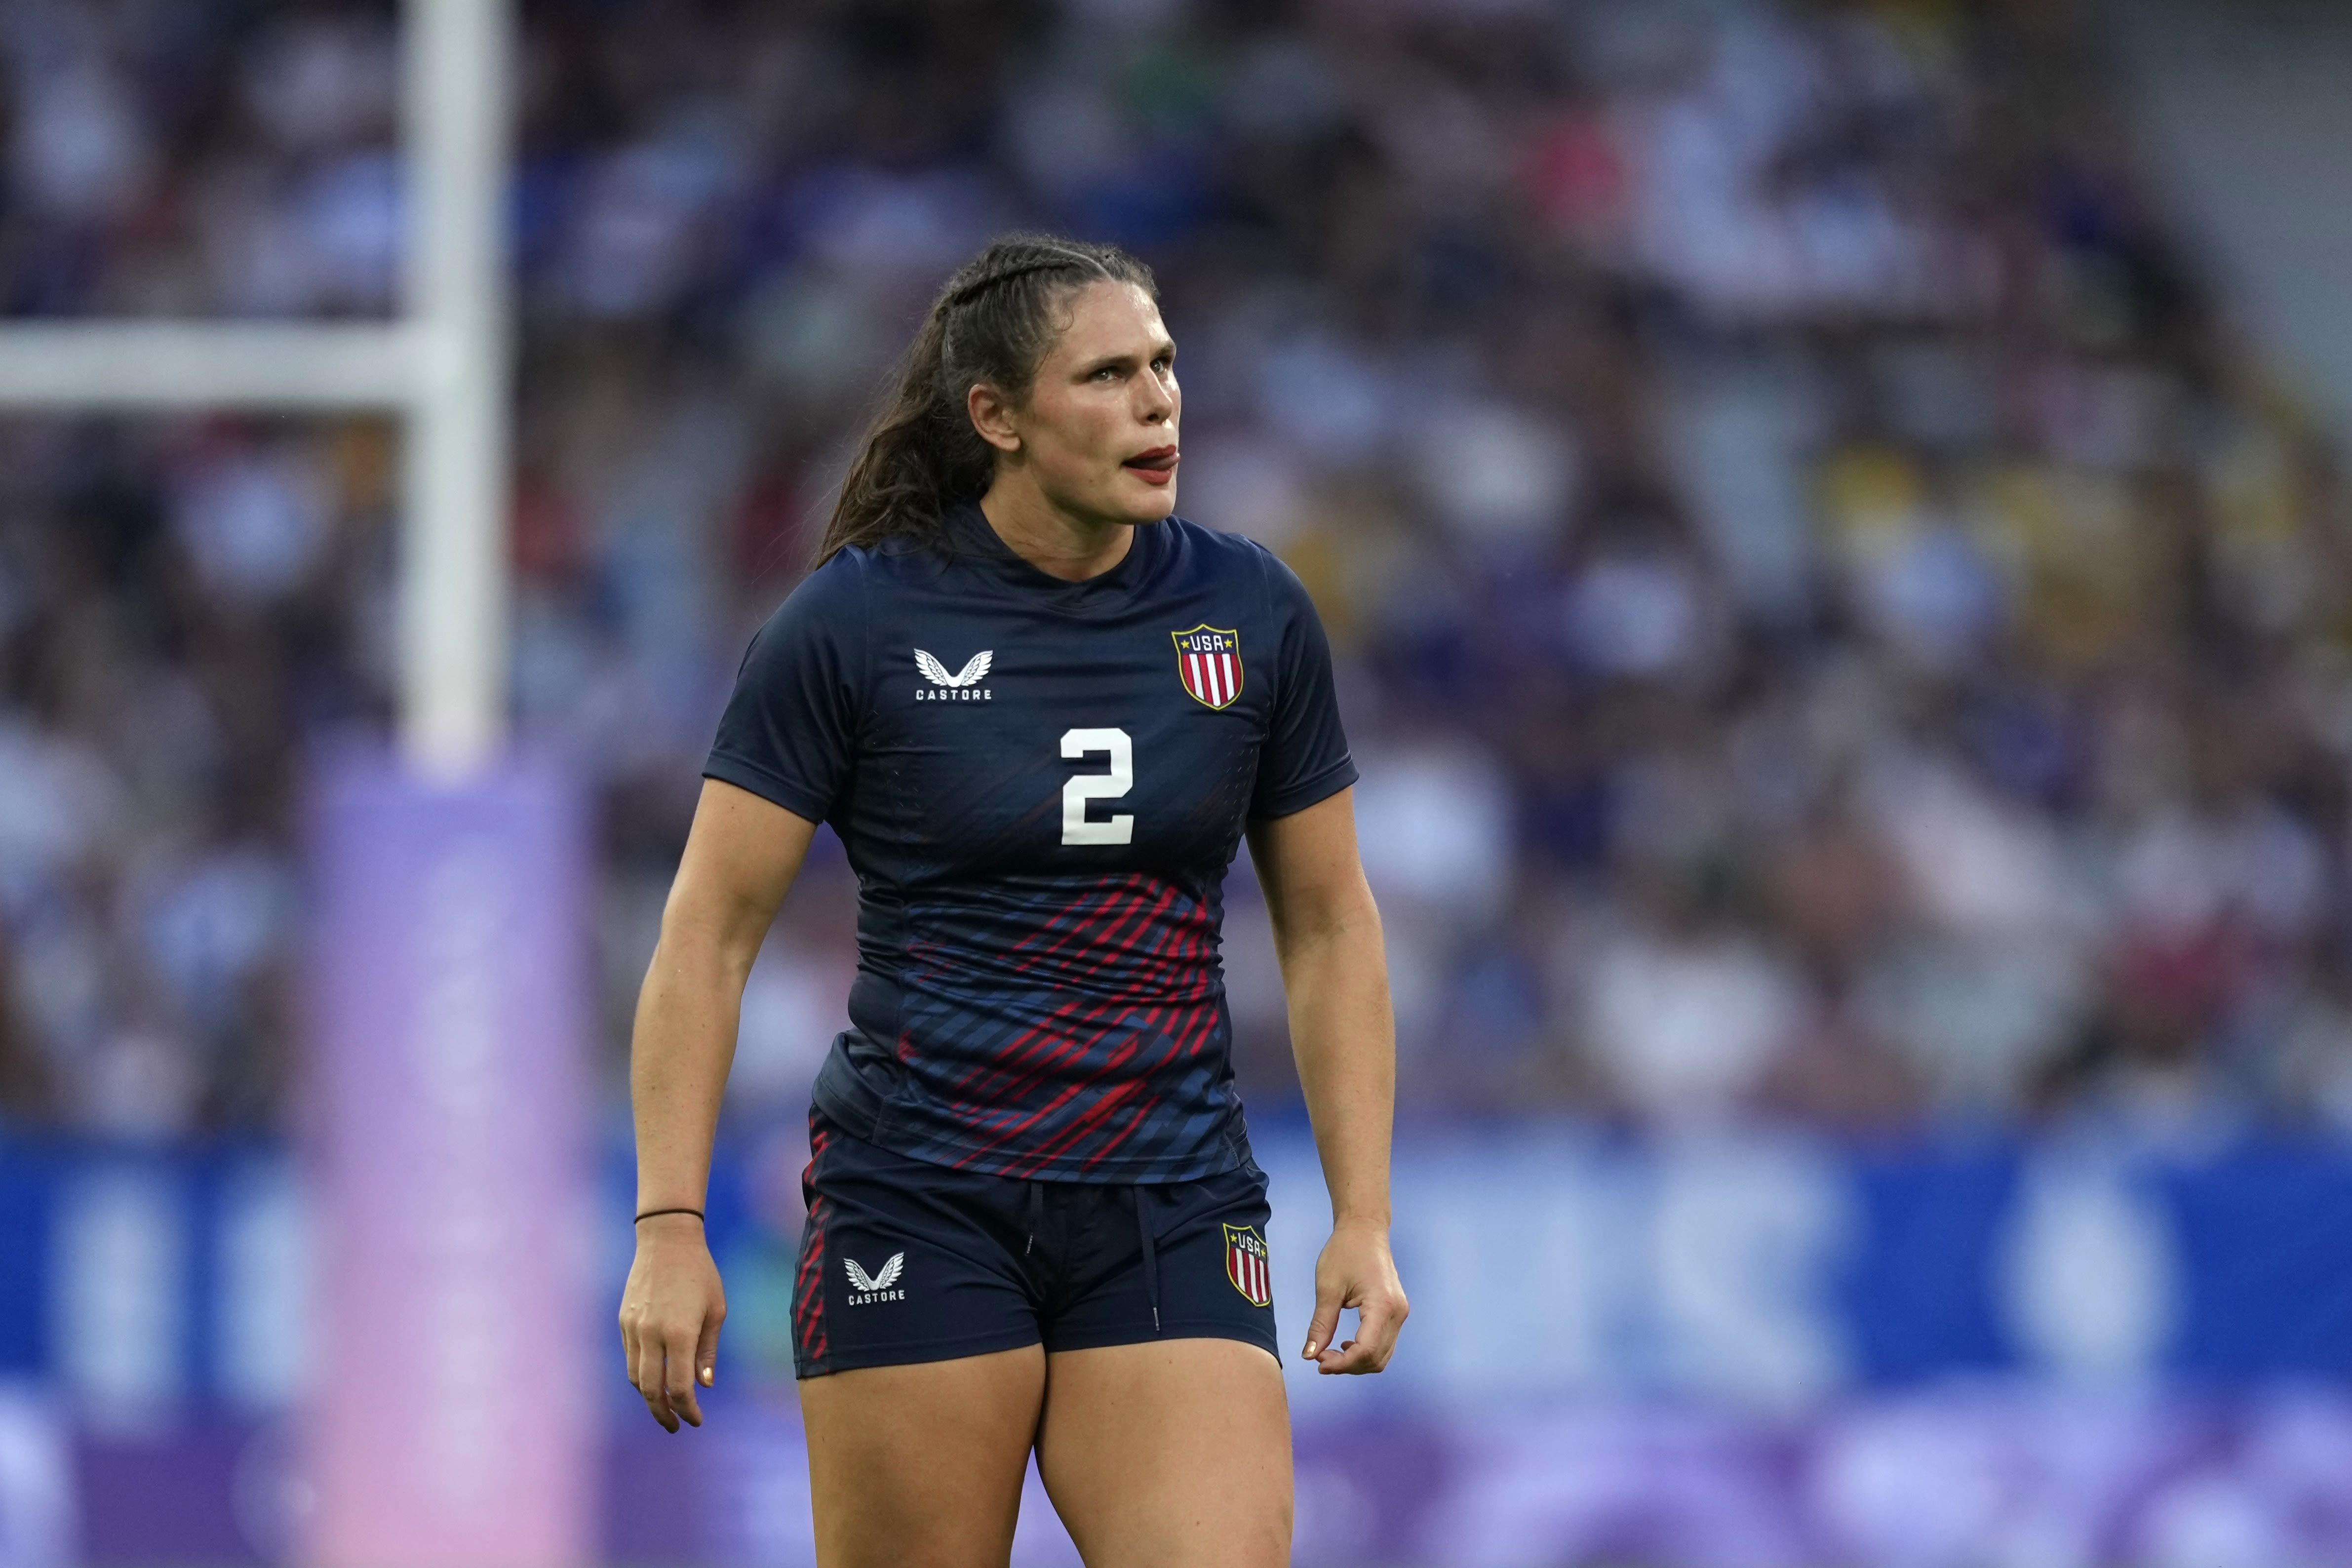 5 things to know about Ilona Maher, USA women's rugby sevens star